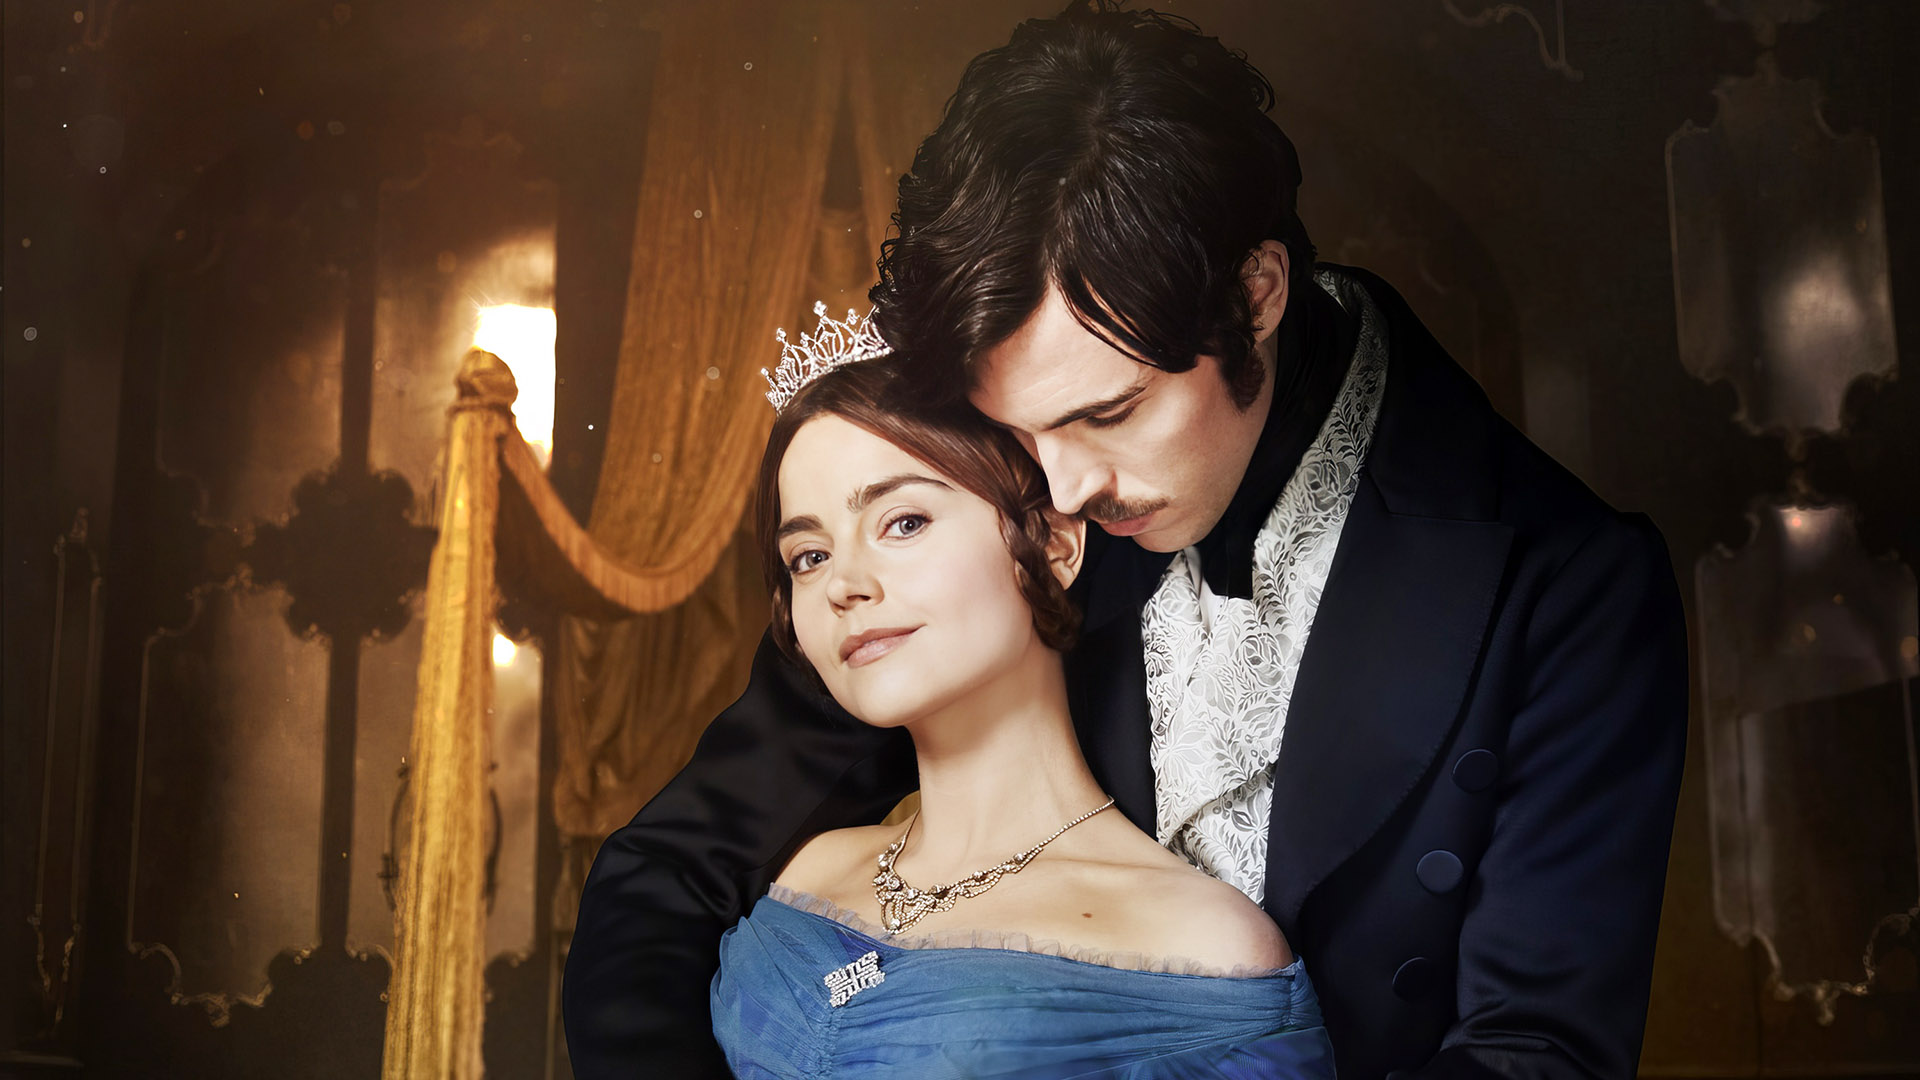 10 Stunning Period Dramas on Prime to Transport You Back in Time